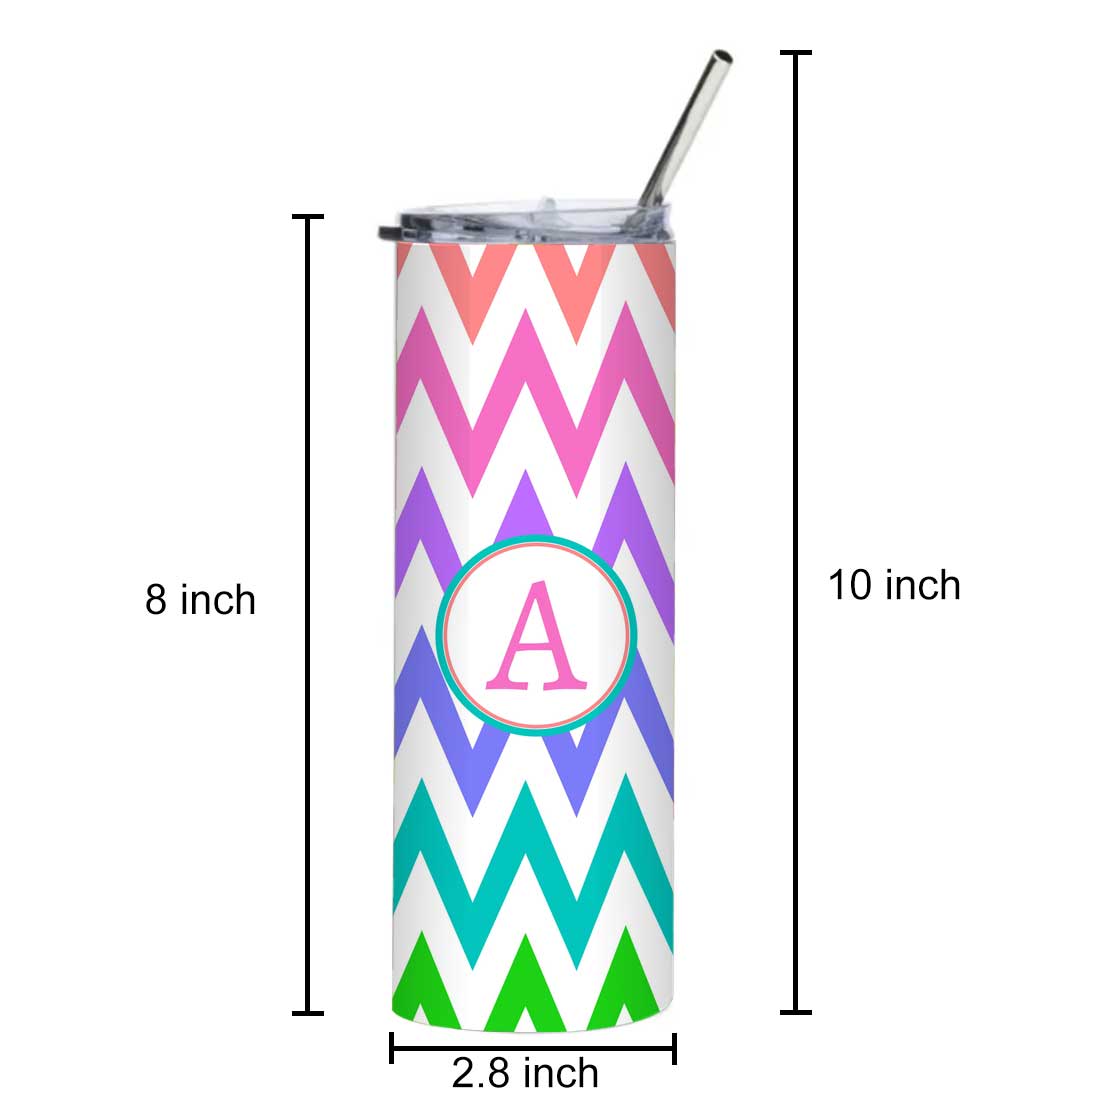 Nutcase Customized Stainless Steel Coffee Mug Insulated Travel Tumbler - 600 ml Cup with Metal Straw